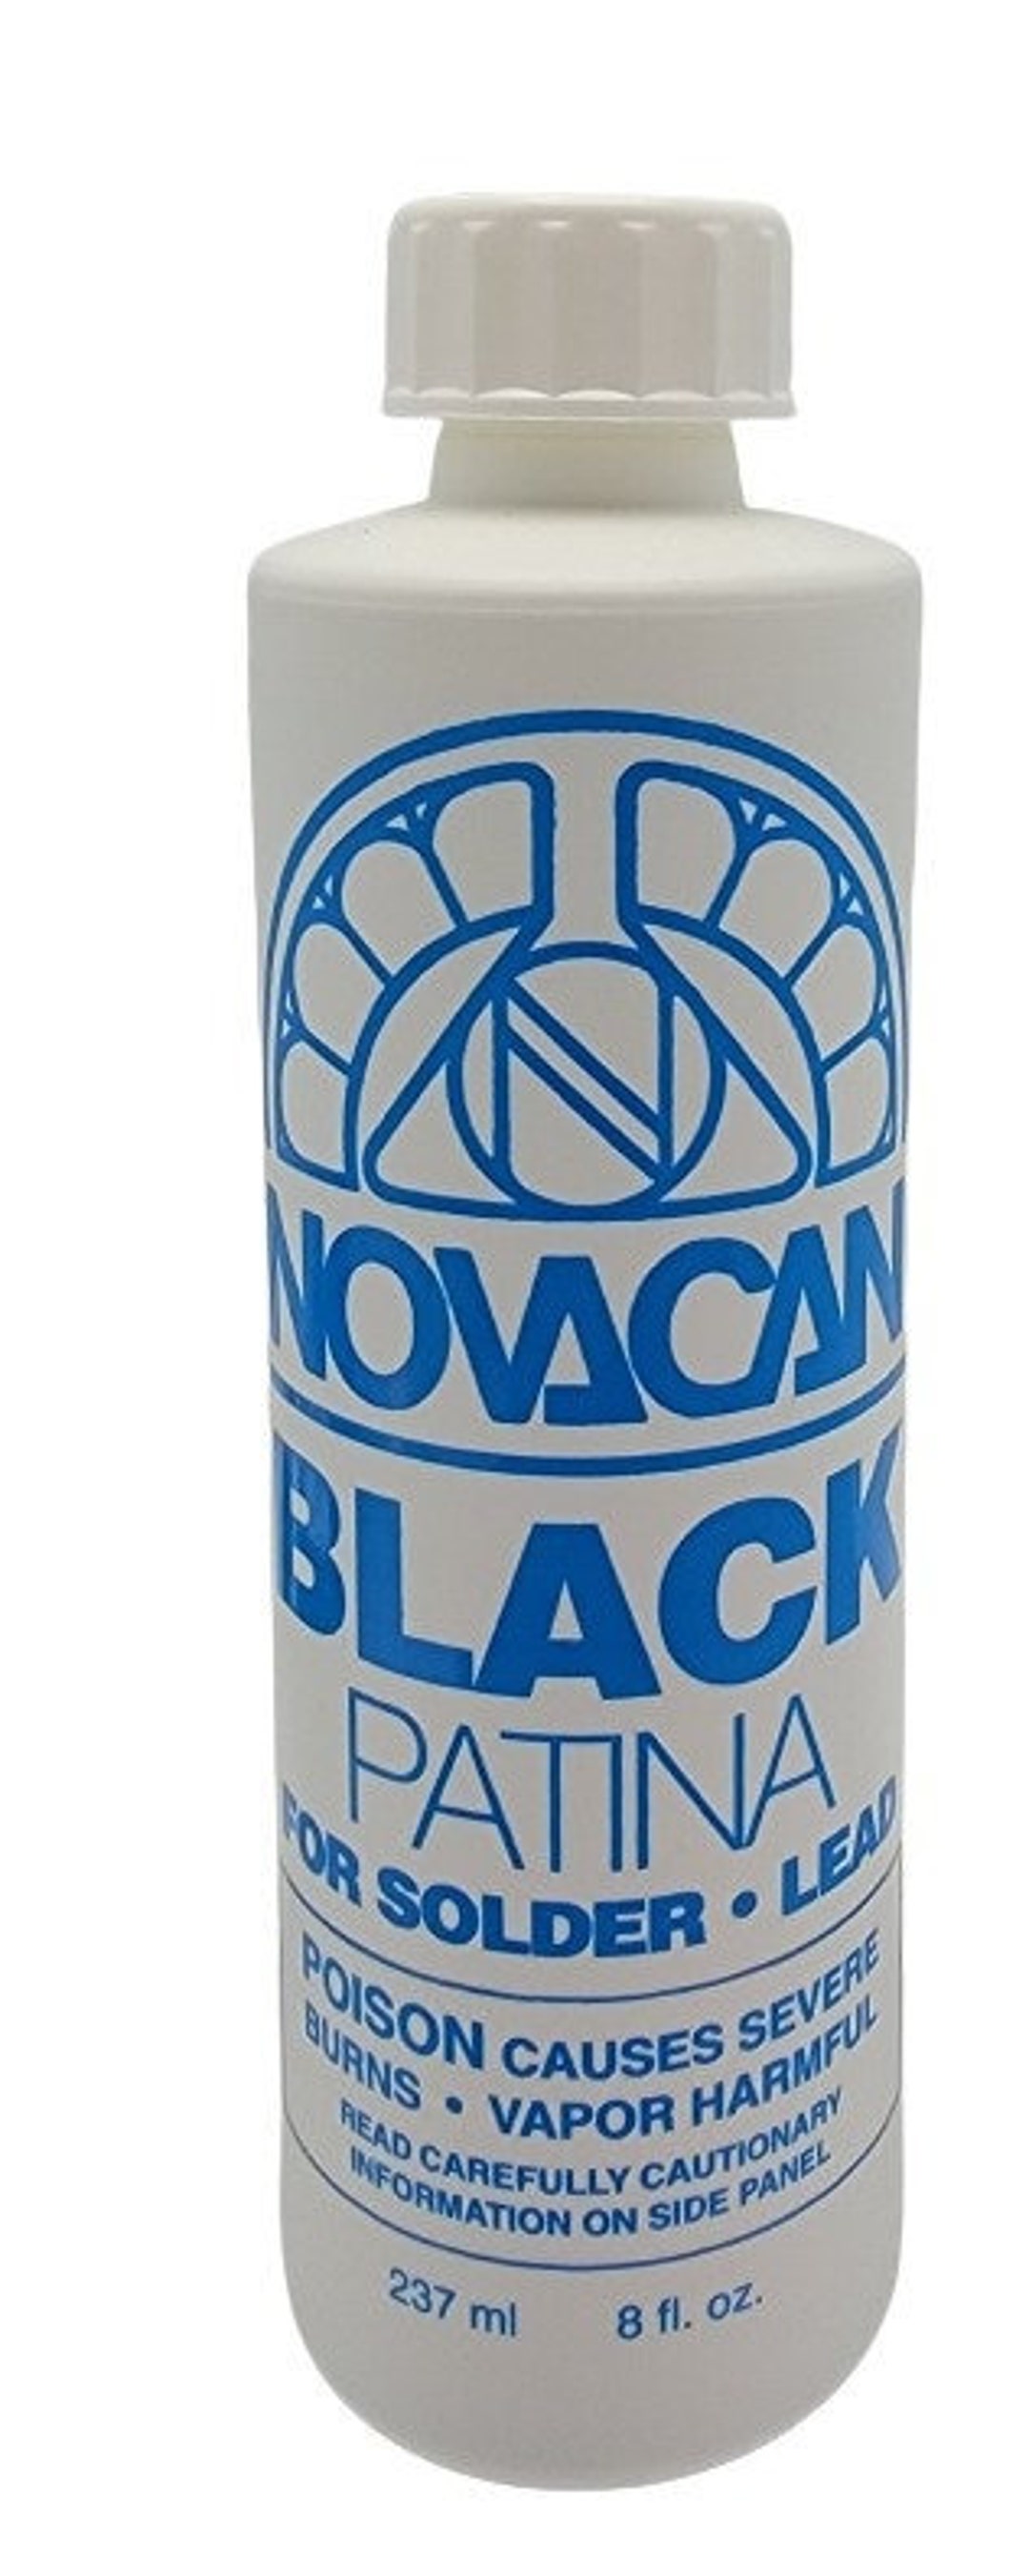 8 Ounce PATINA for Stained Glass Solder Lines Novacan BLACK for Solder Lead  Chemicals 